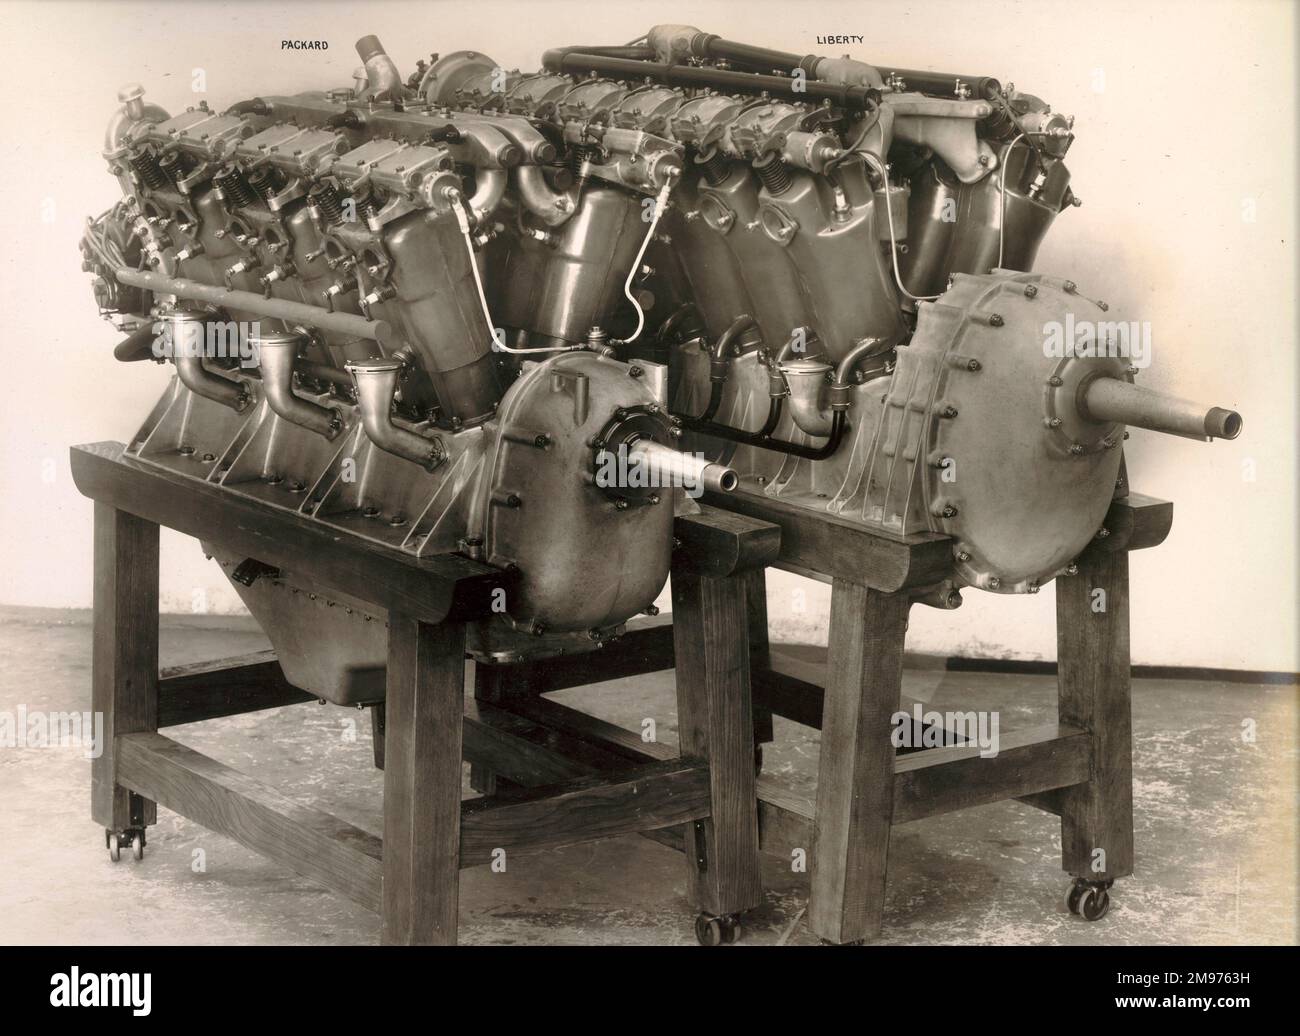 From left: Packard and Liberty engines. Stock Photo